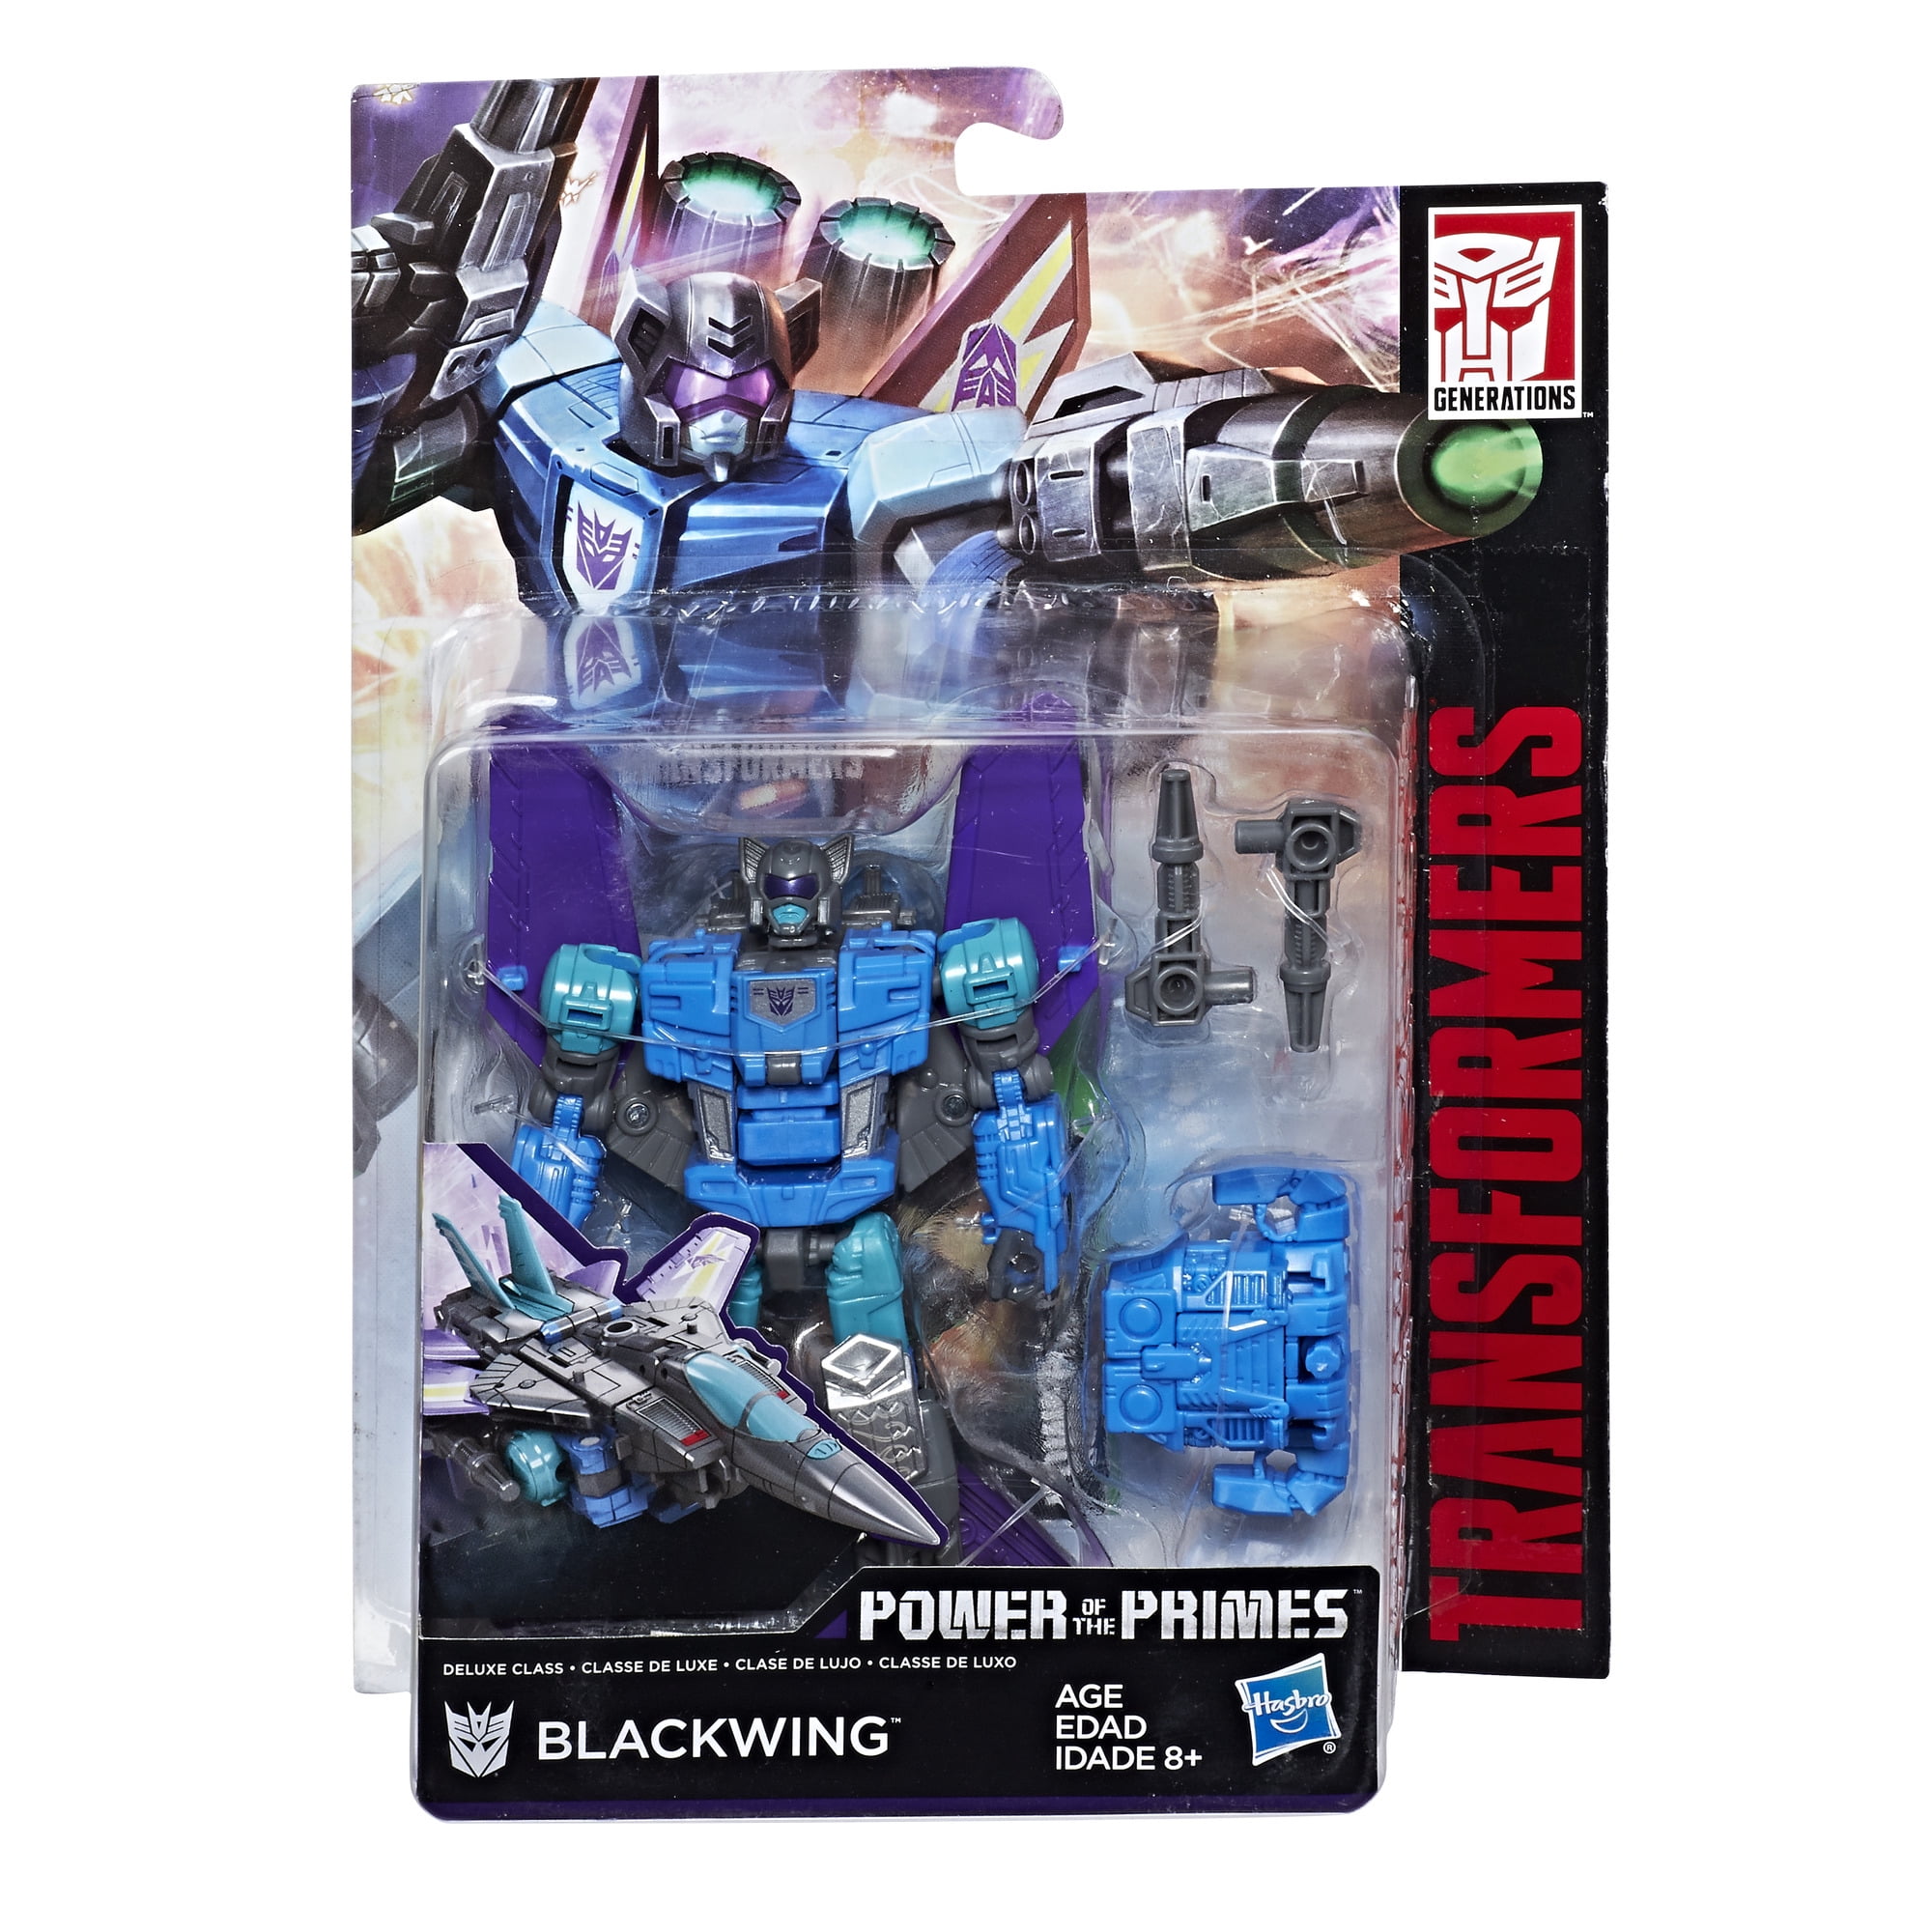 Transformers Power Of The Primes Blackwing DLX Class New Sealed 